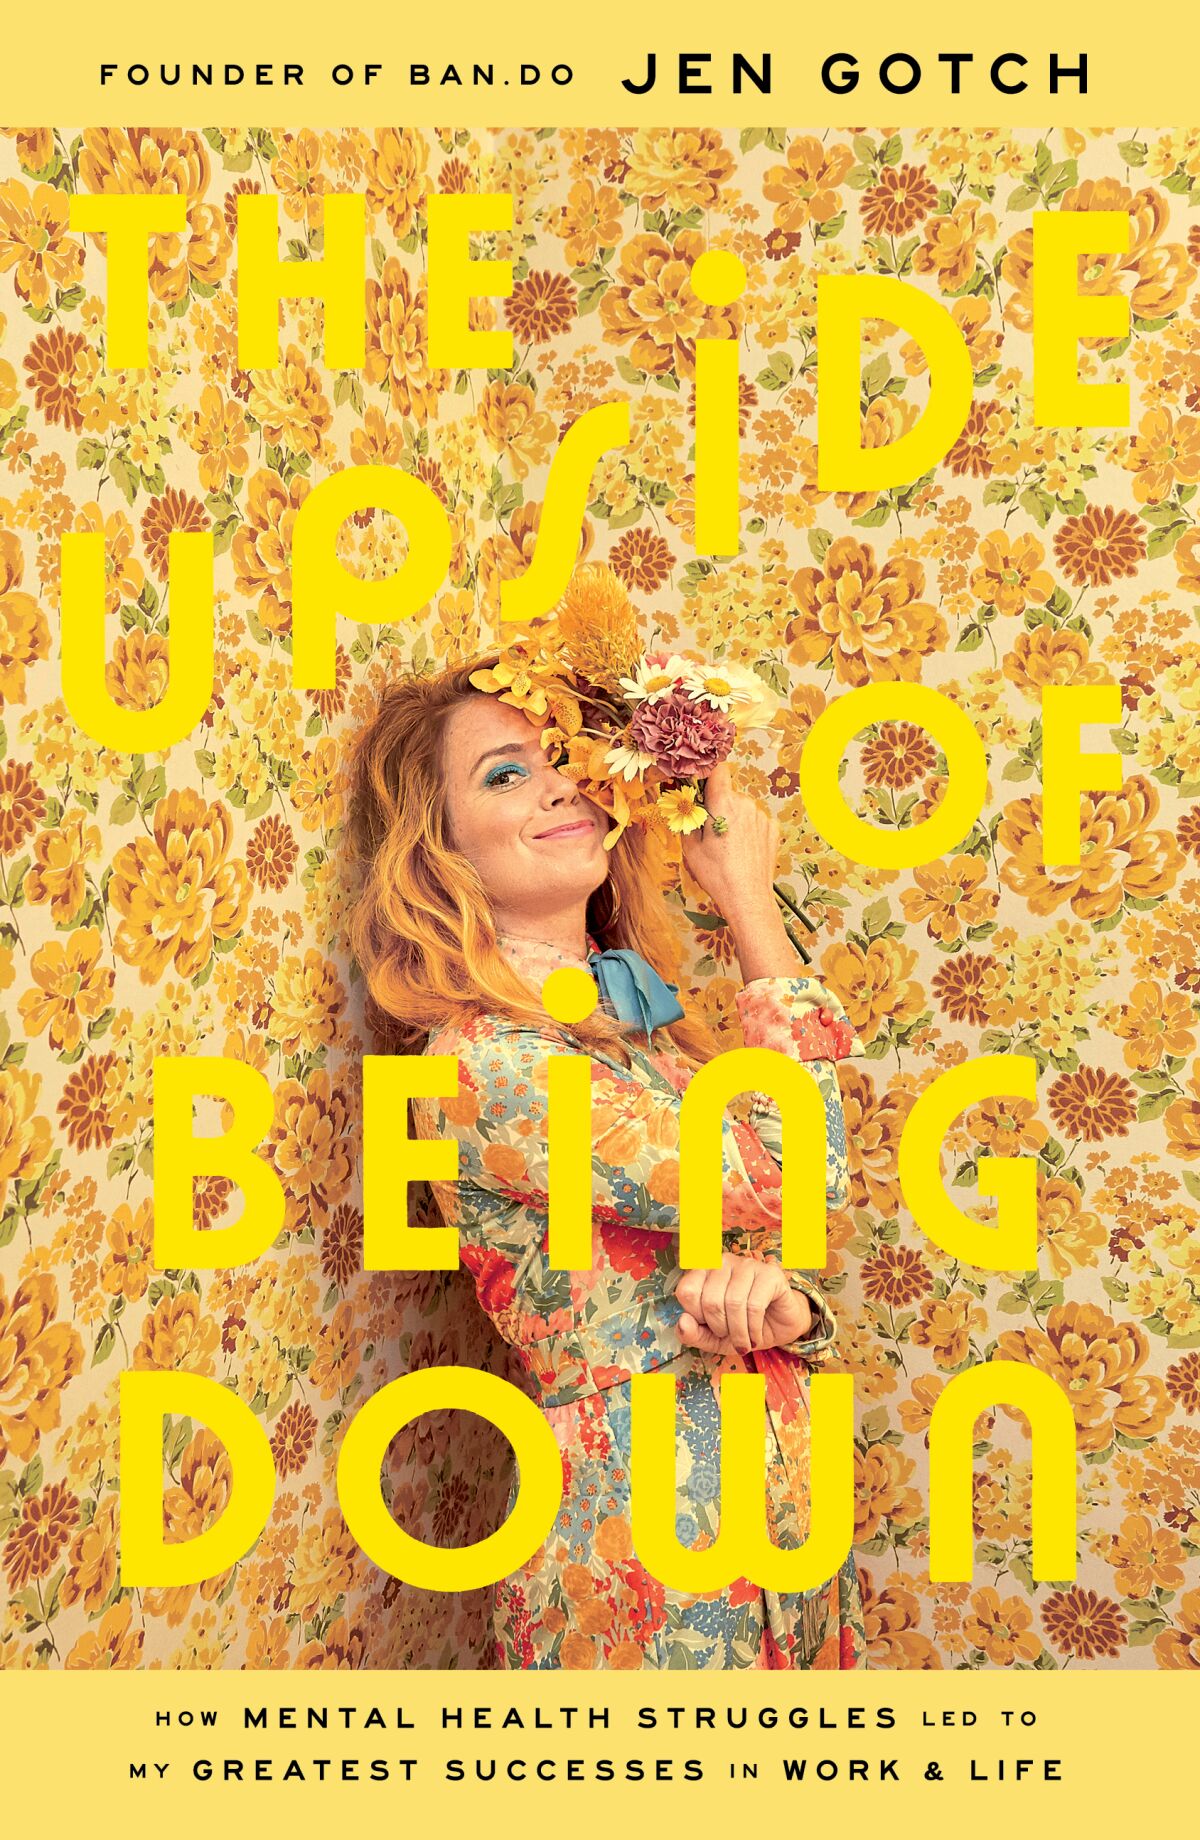 "The Upside of Being Down" by Jen Gotch